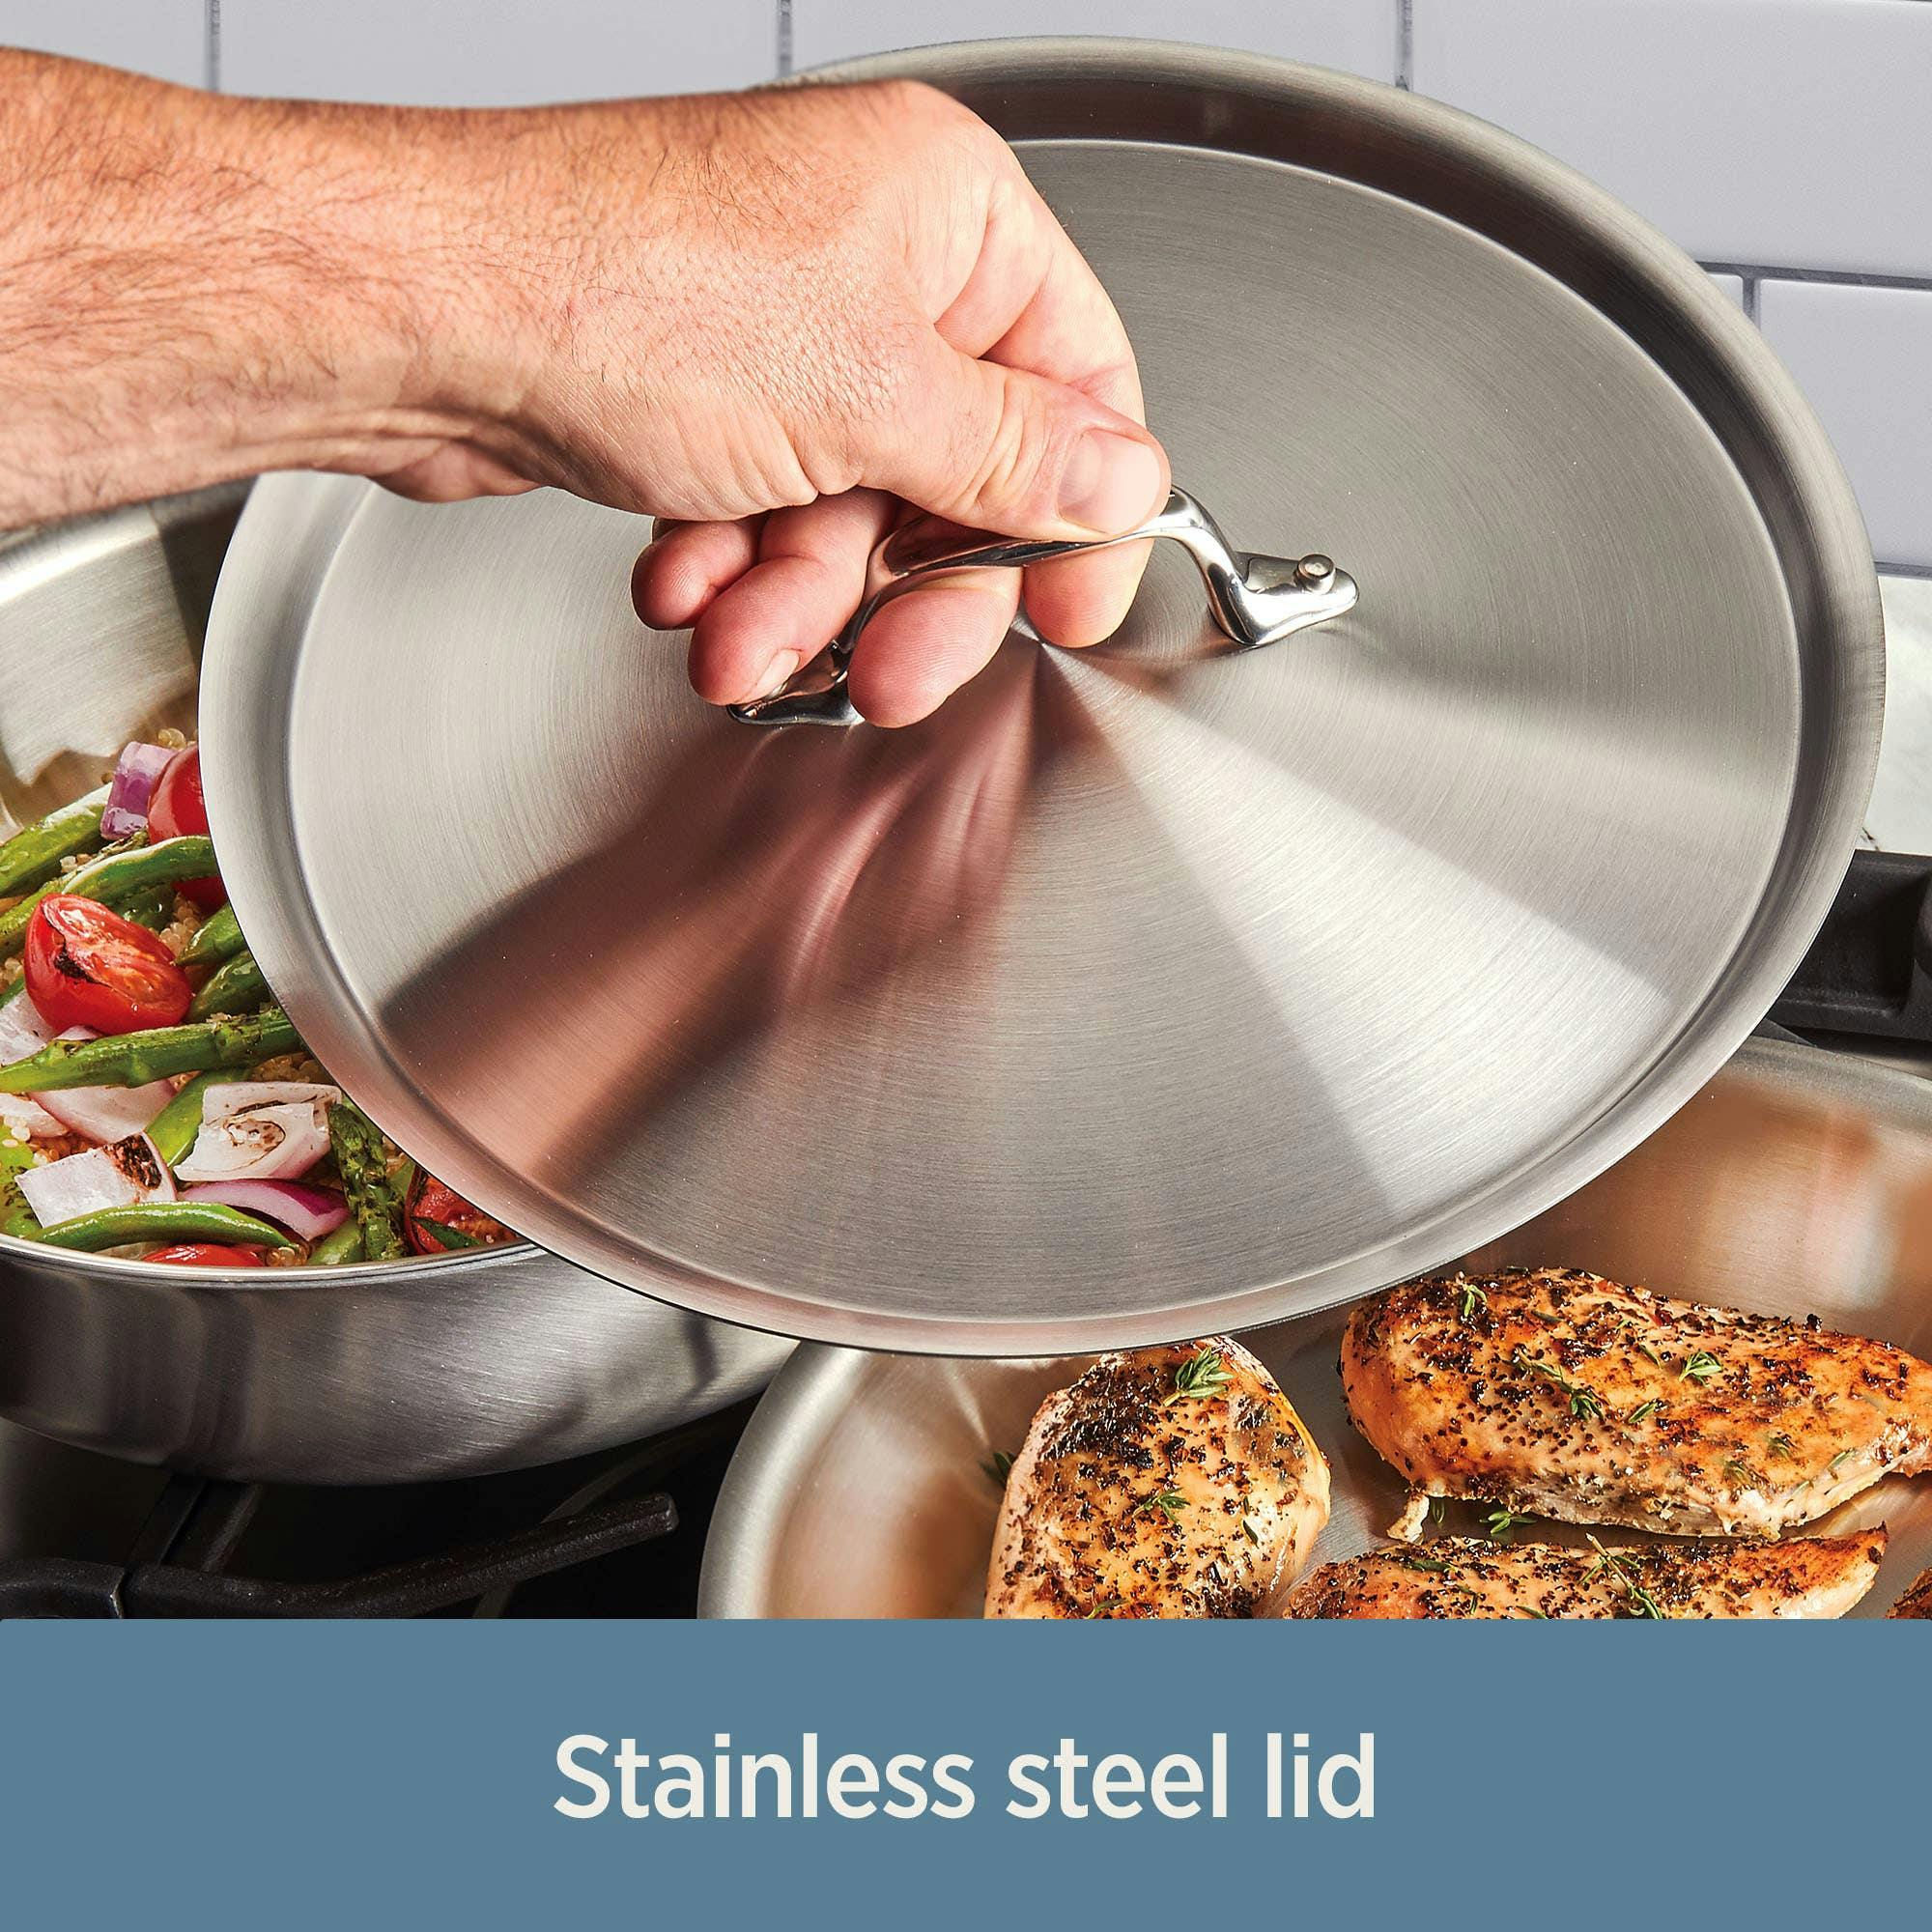 NEW All-Clad D3 3-Ply Stainless Steel Fry Pan with Lid 10 Inch